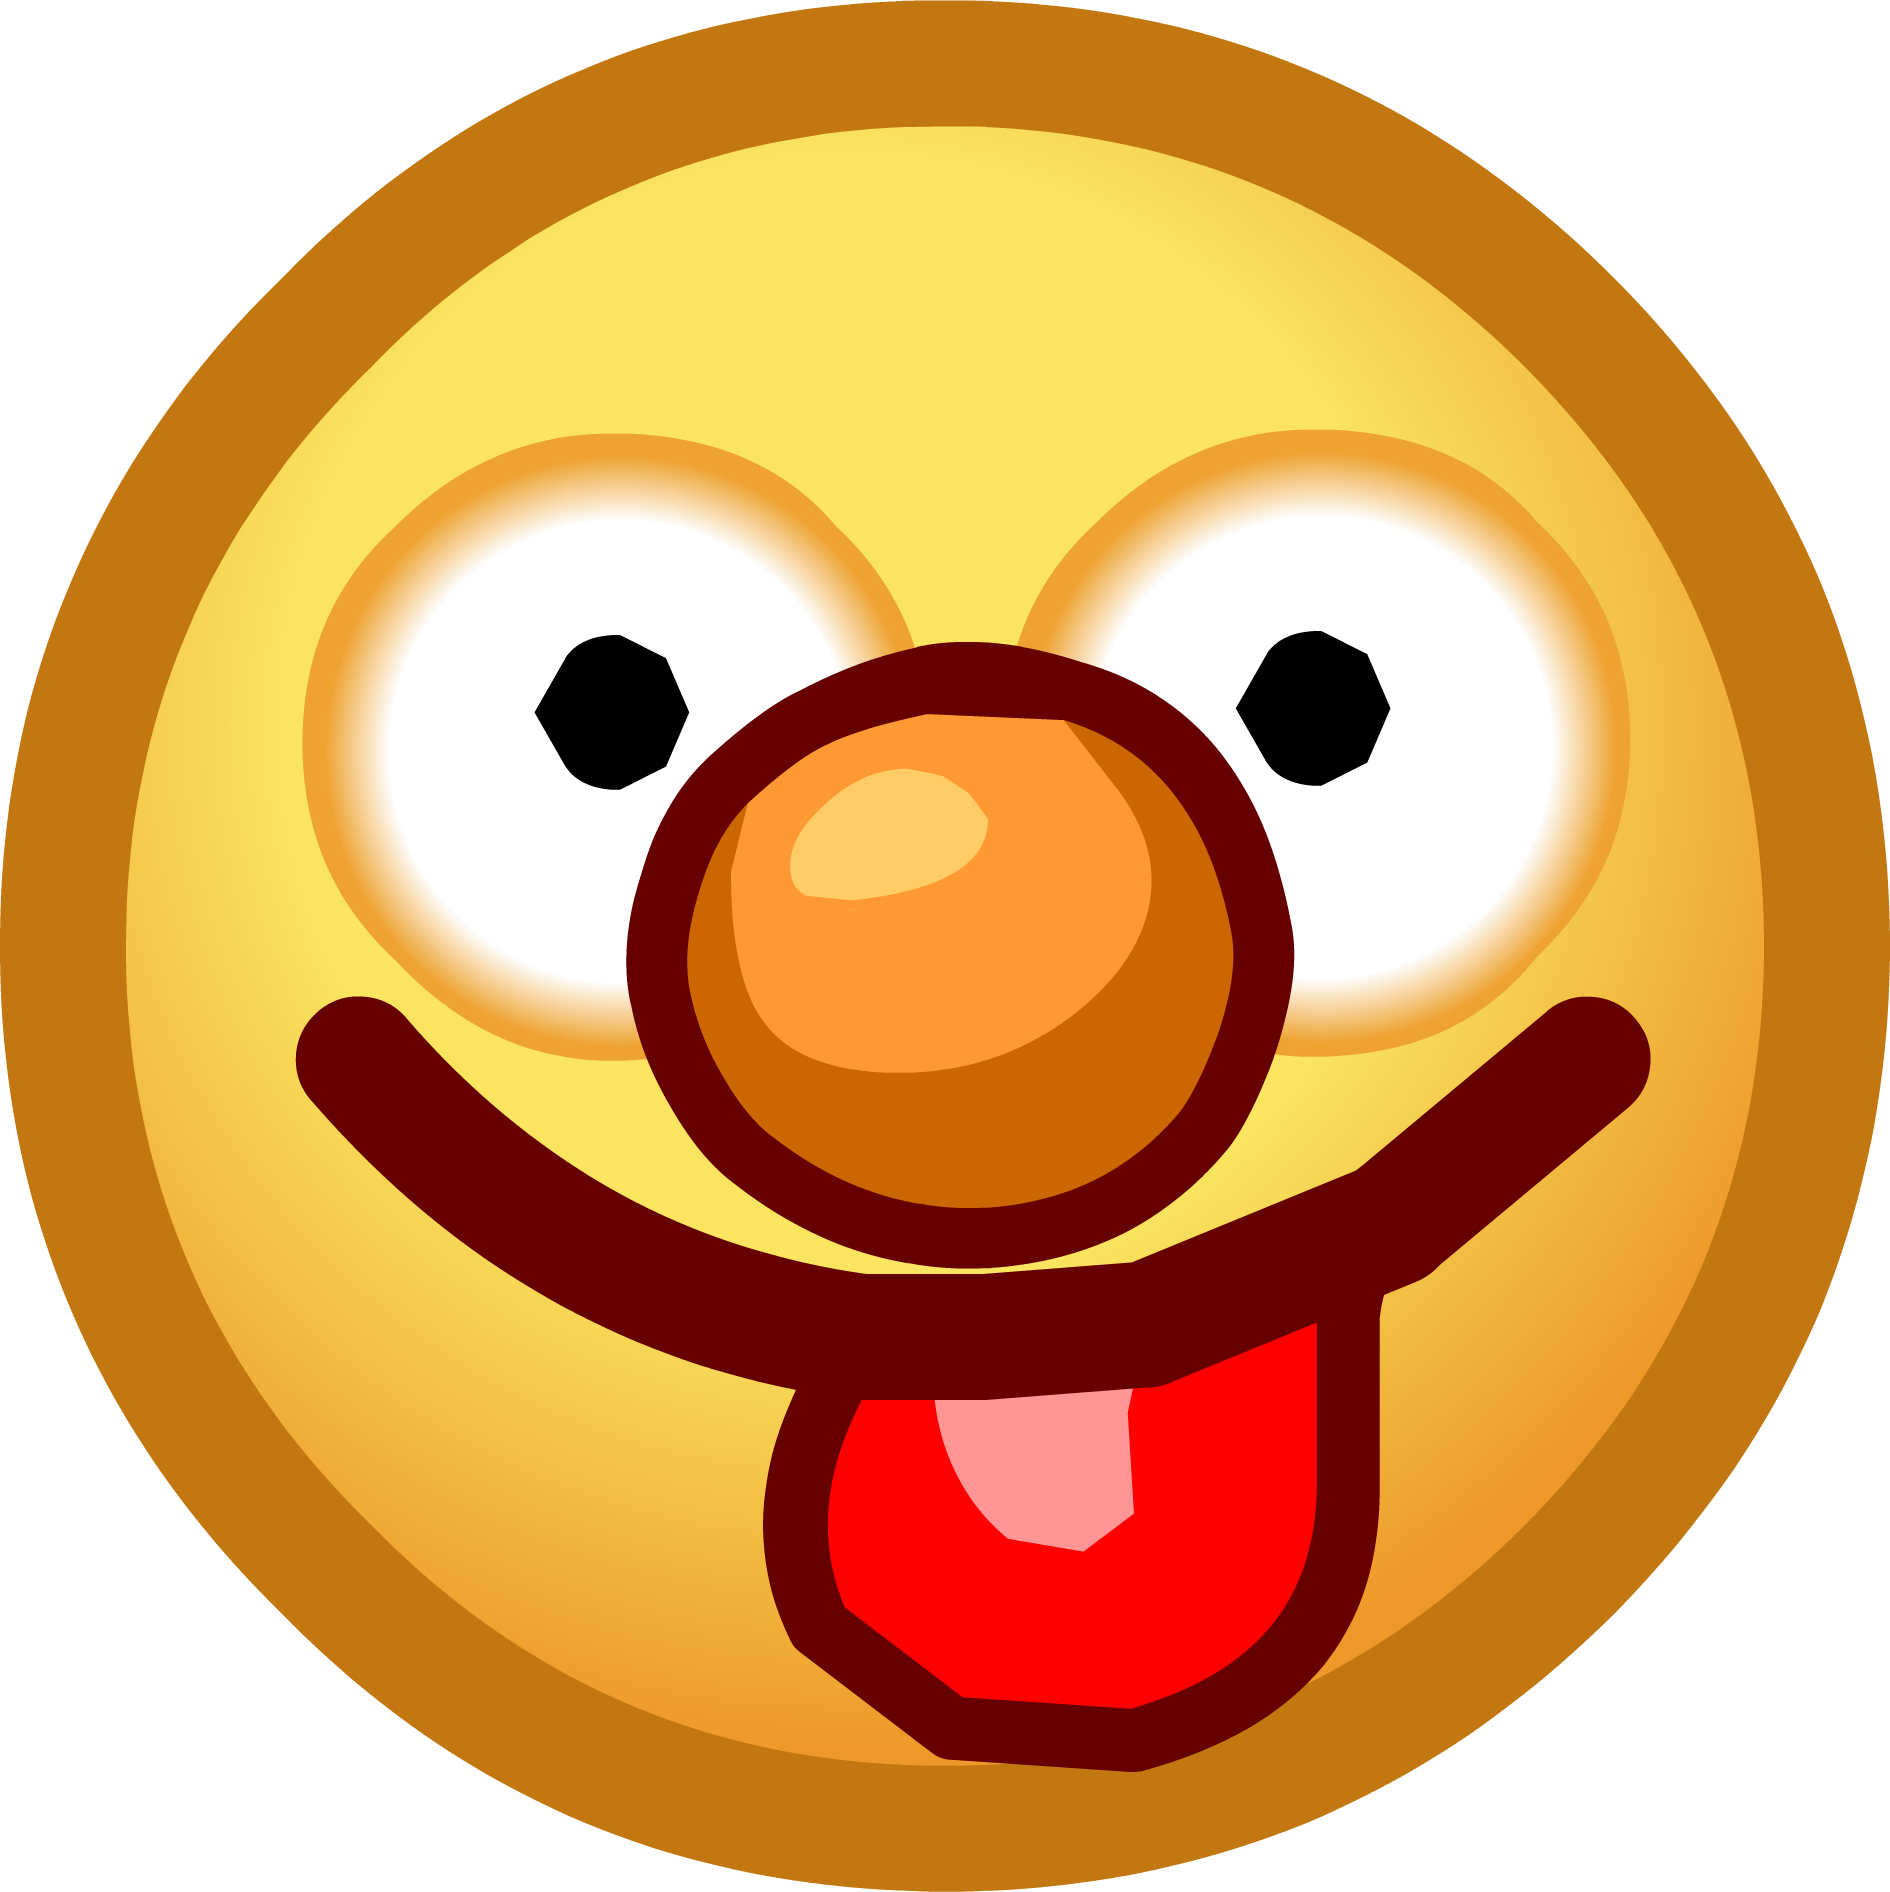 Smiley Face With Tongue Sticking Out Muppets 2014 Emoticons Tongue Png